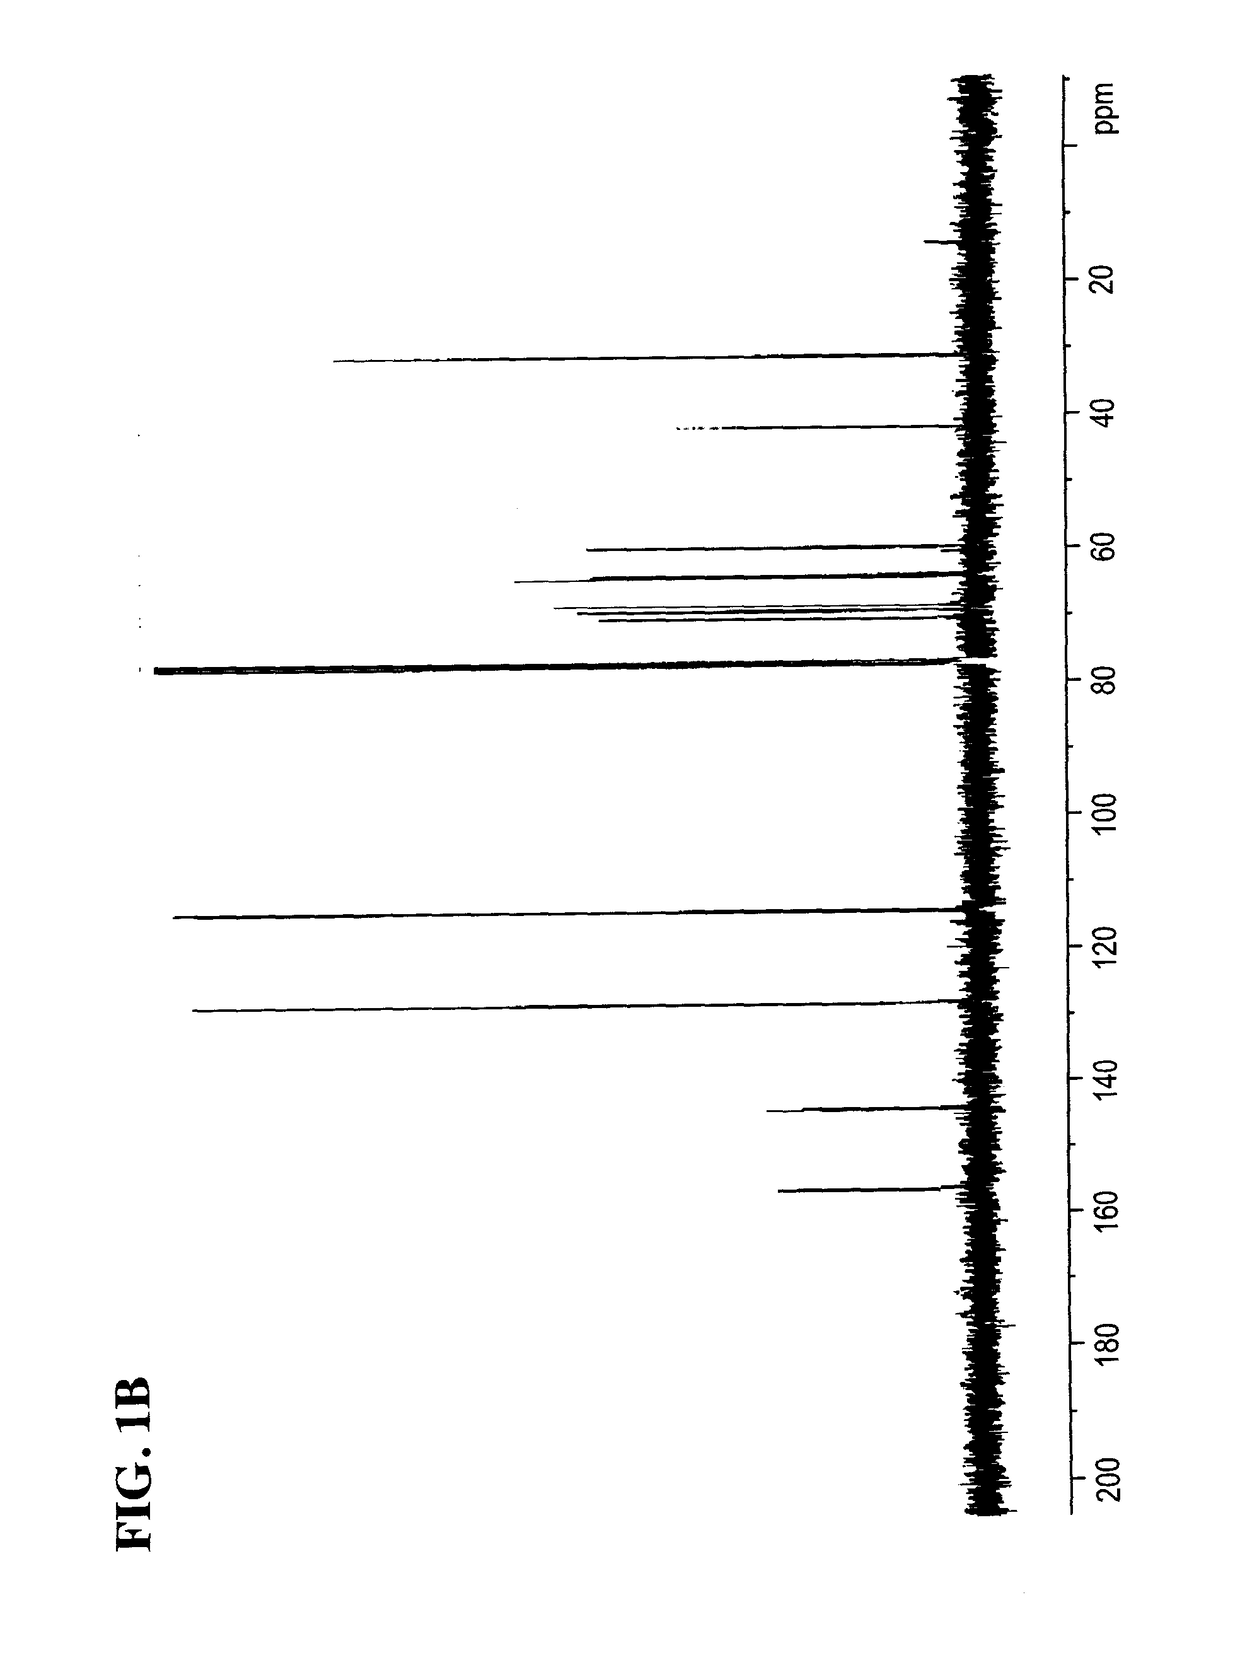 Bisphenol ether derivatives and methods for using the same